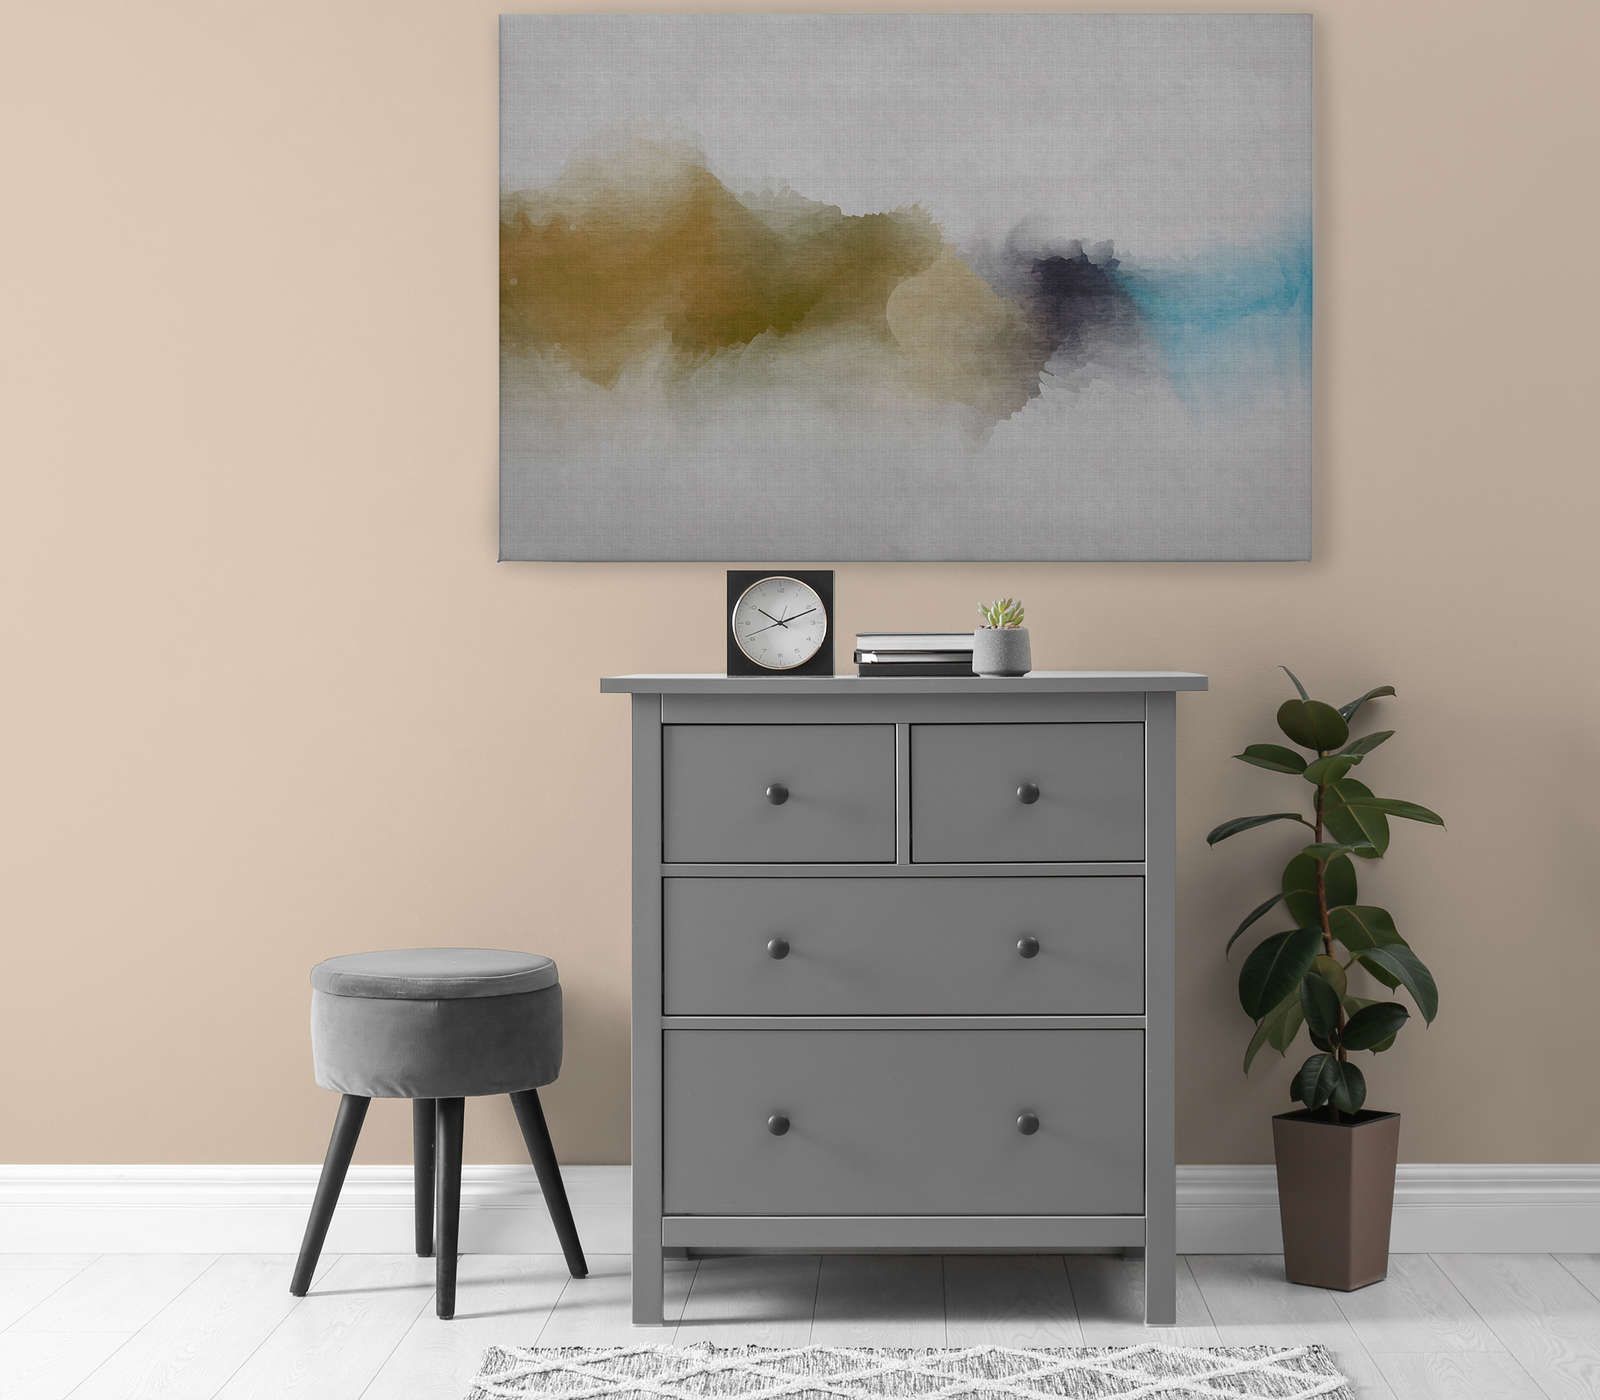             Daydream 3 - Canvas painting cloudy watercolour pattern- natural linen look - 1.20 m x 0.80 m
        